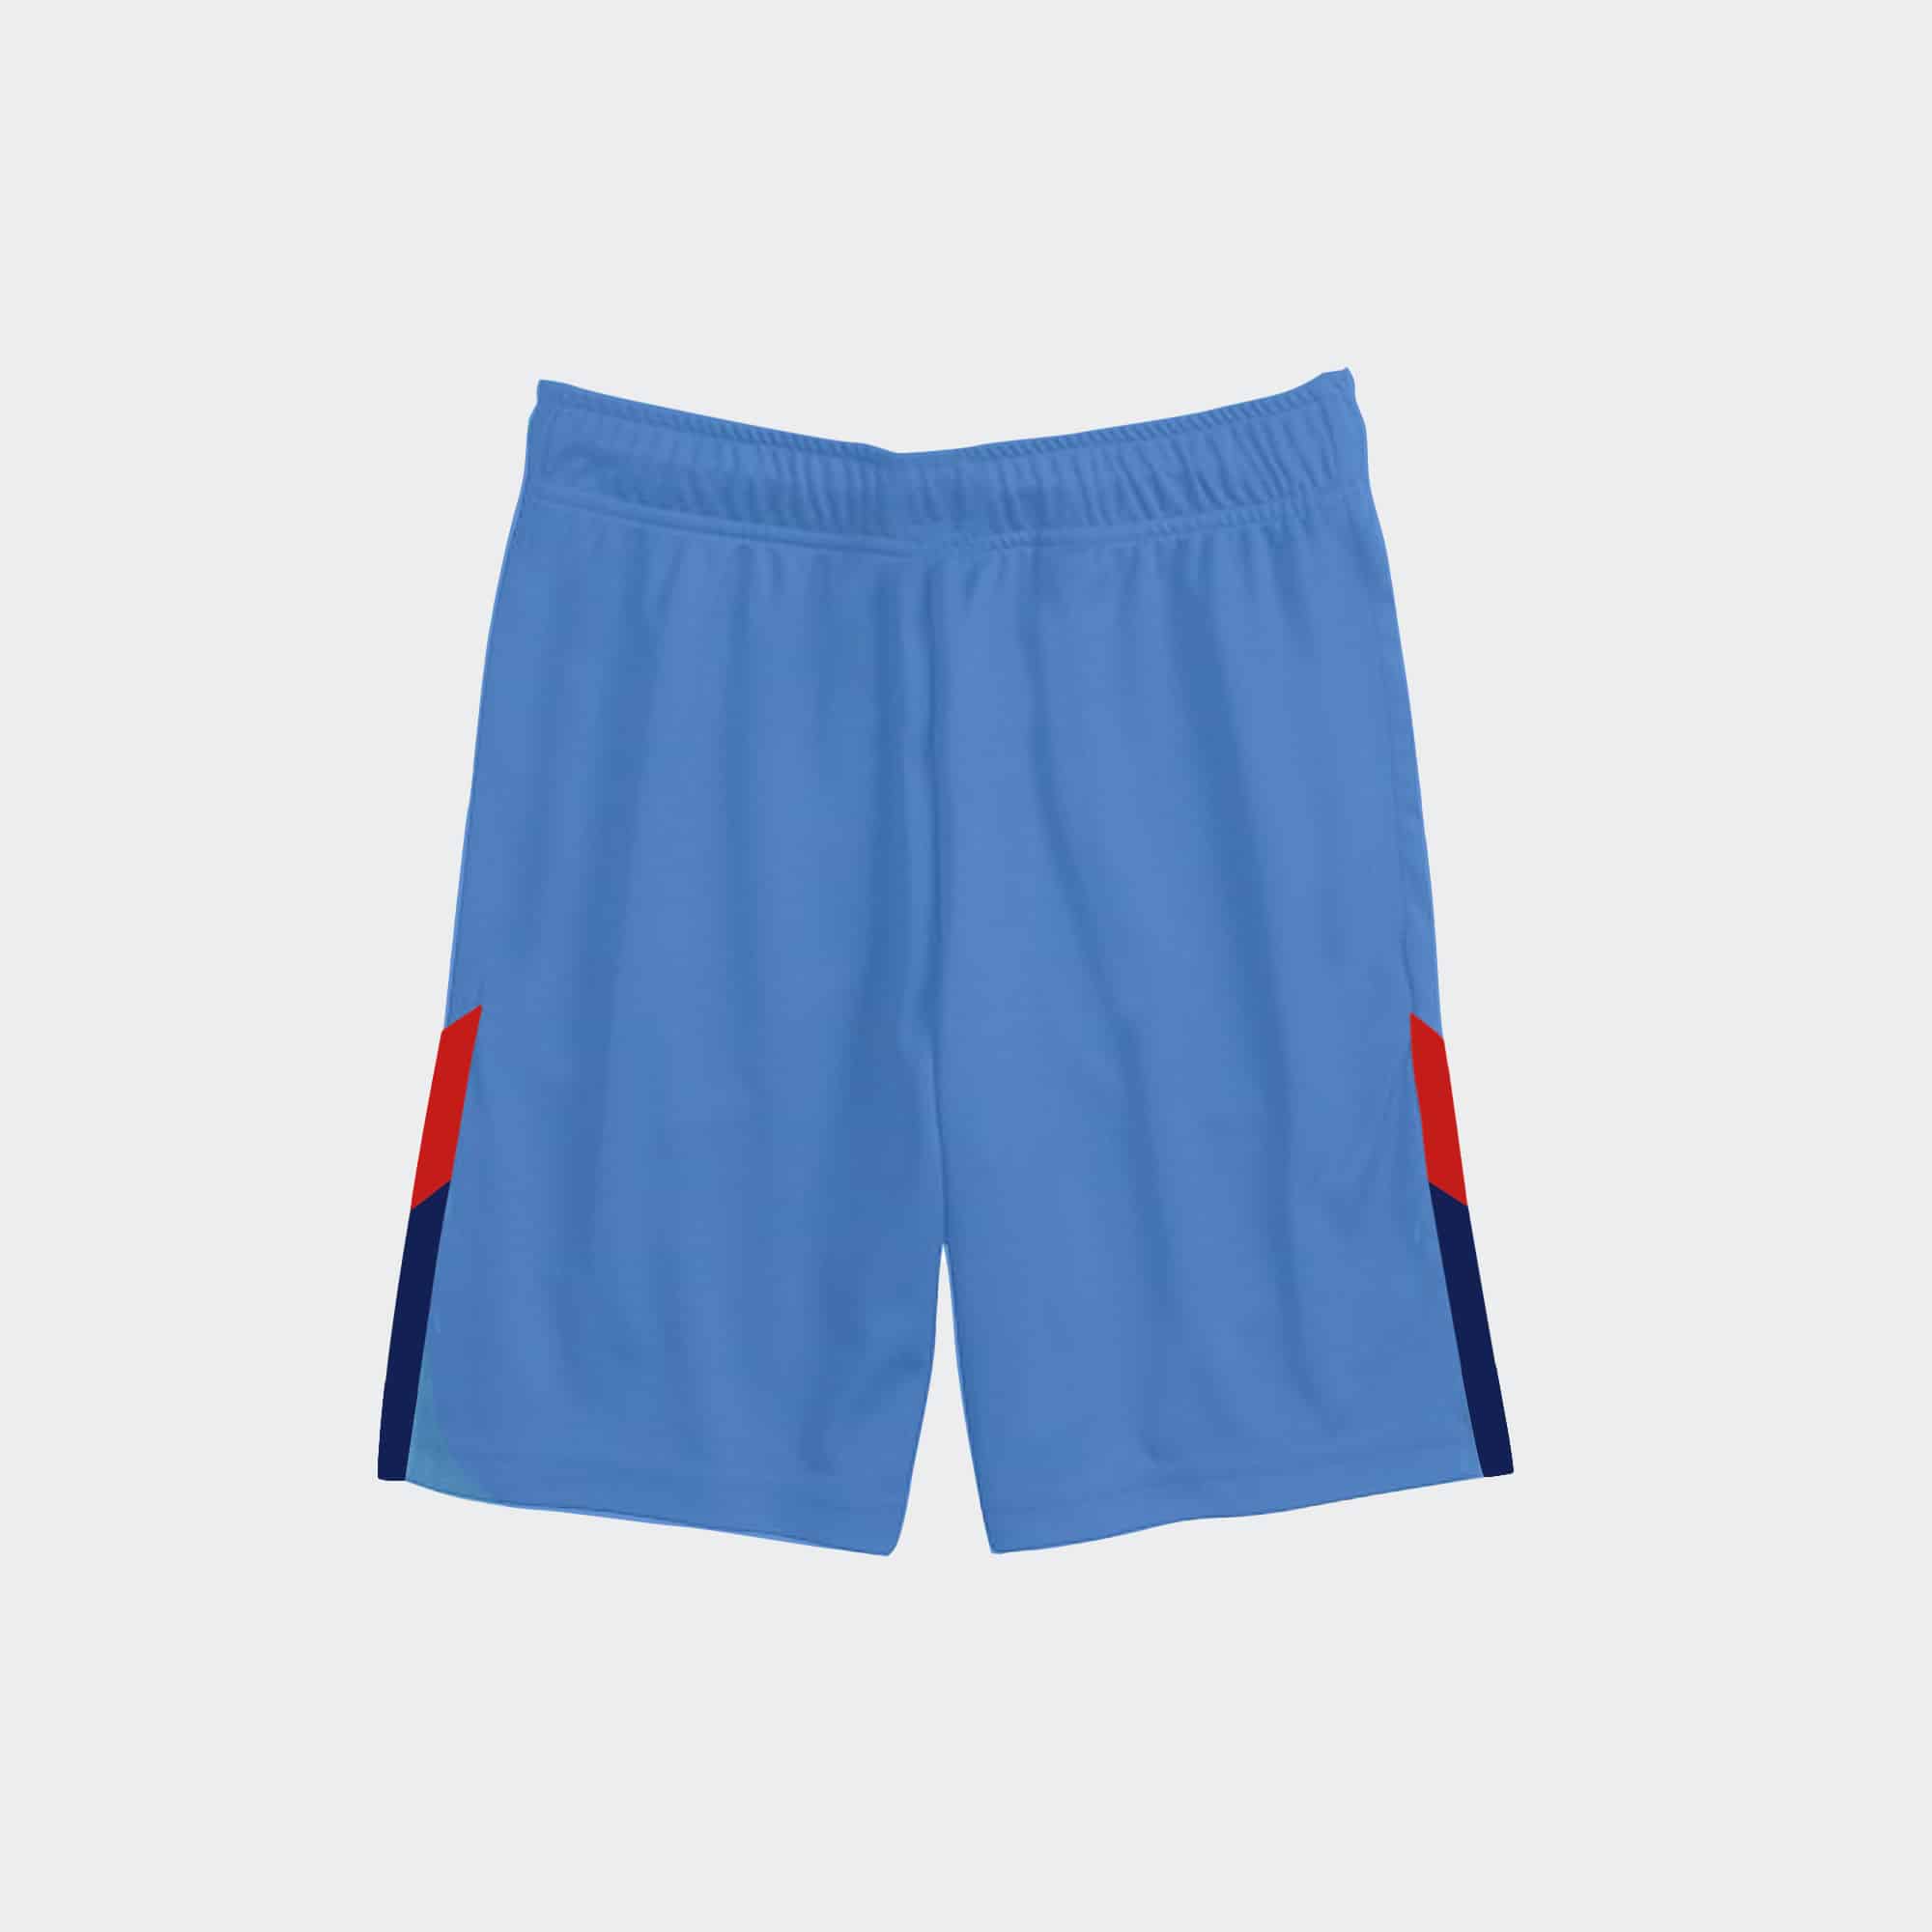 Smart, comfortable and Well Fitting Shorts for Boys 1 pc-RKFCBS006